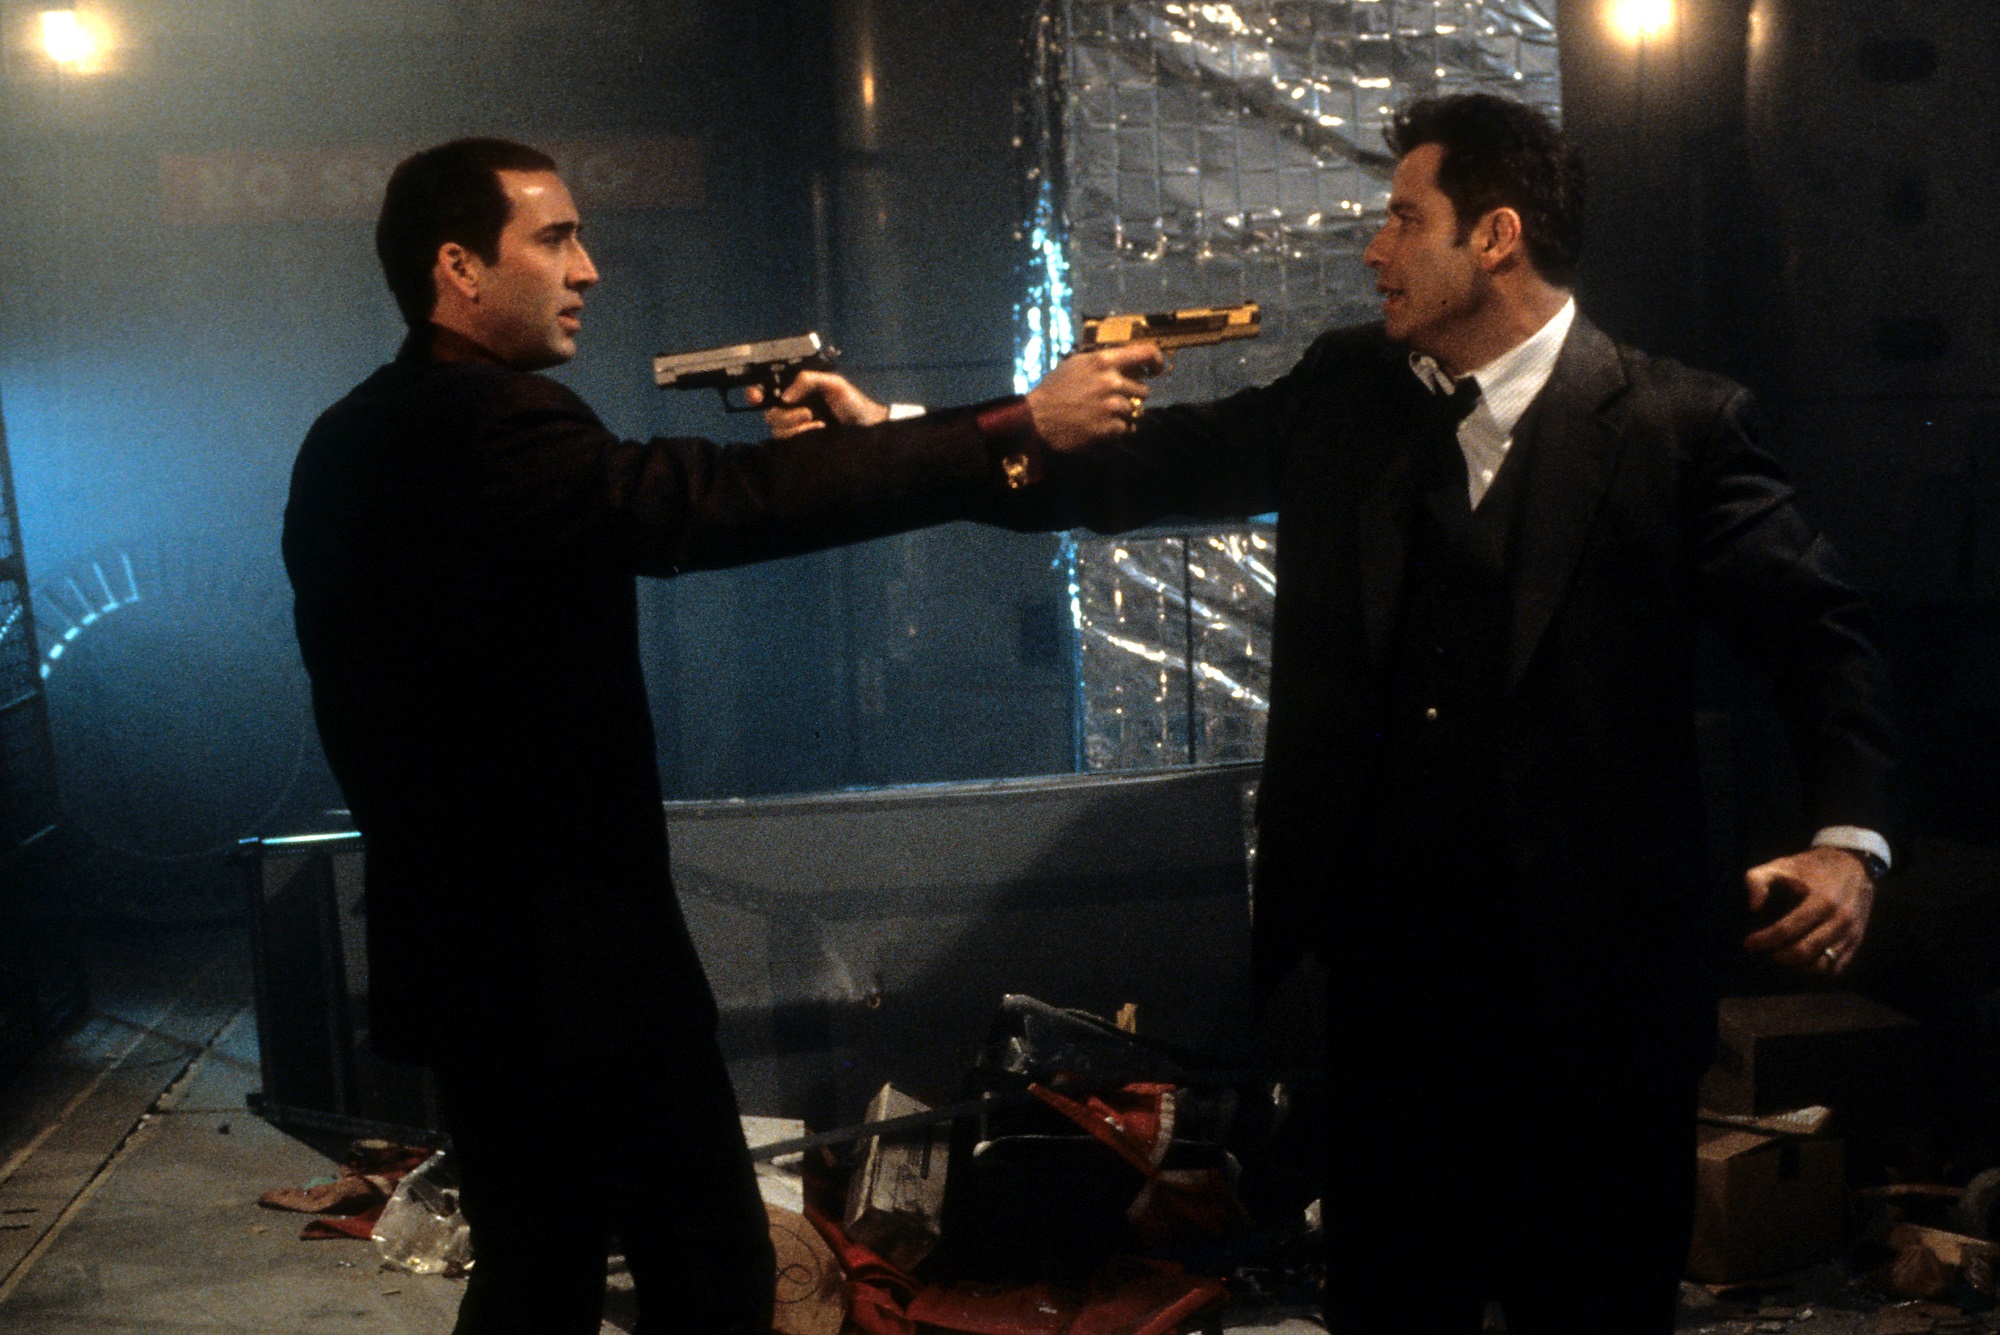 John Travolta and Nicolas Cage point guns at each other